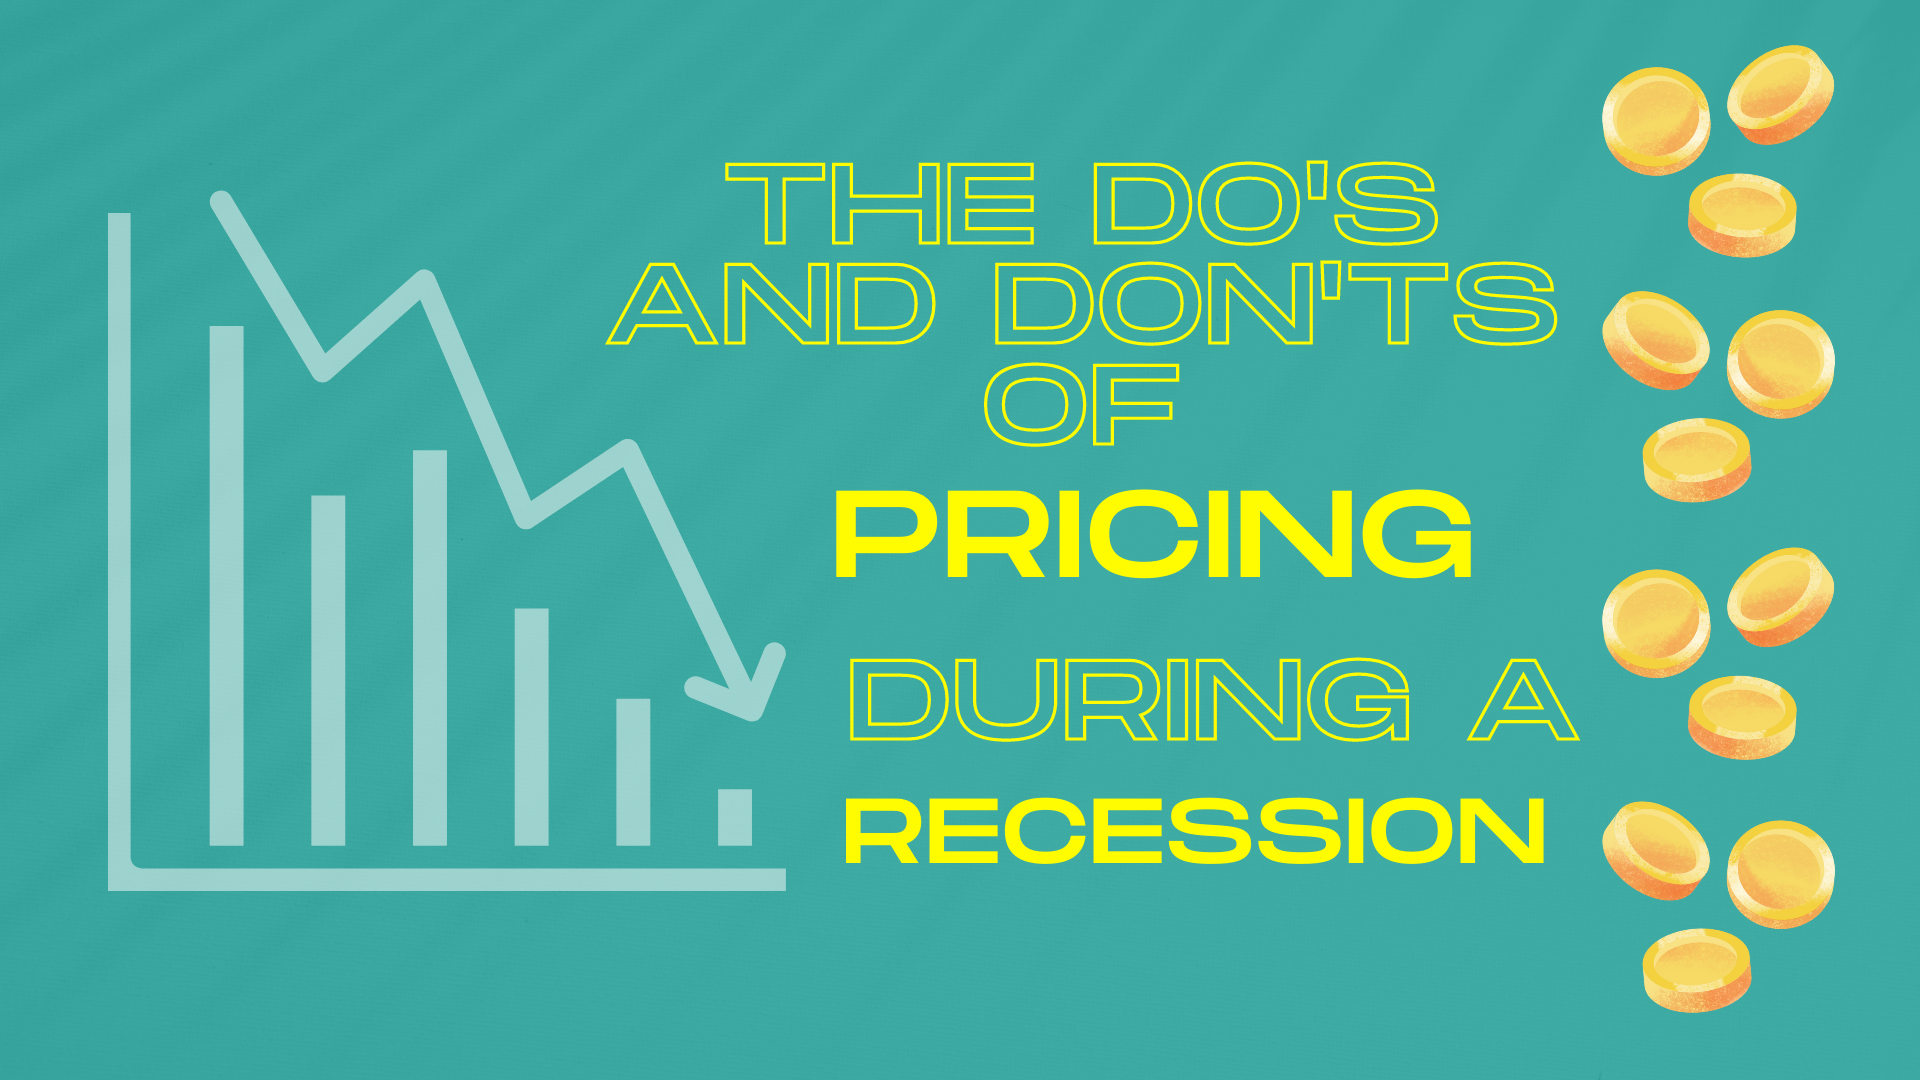 The Do's and Don'ts of pricing in a recession